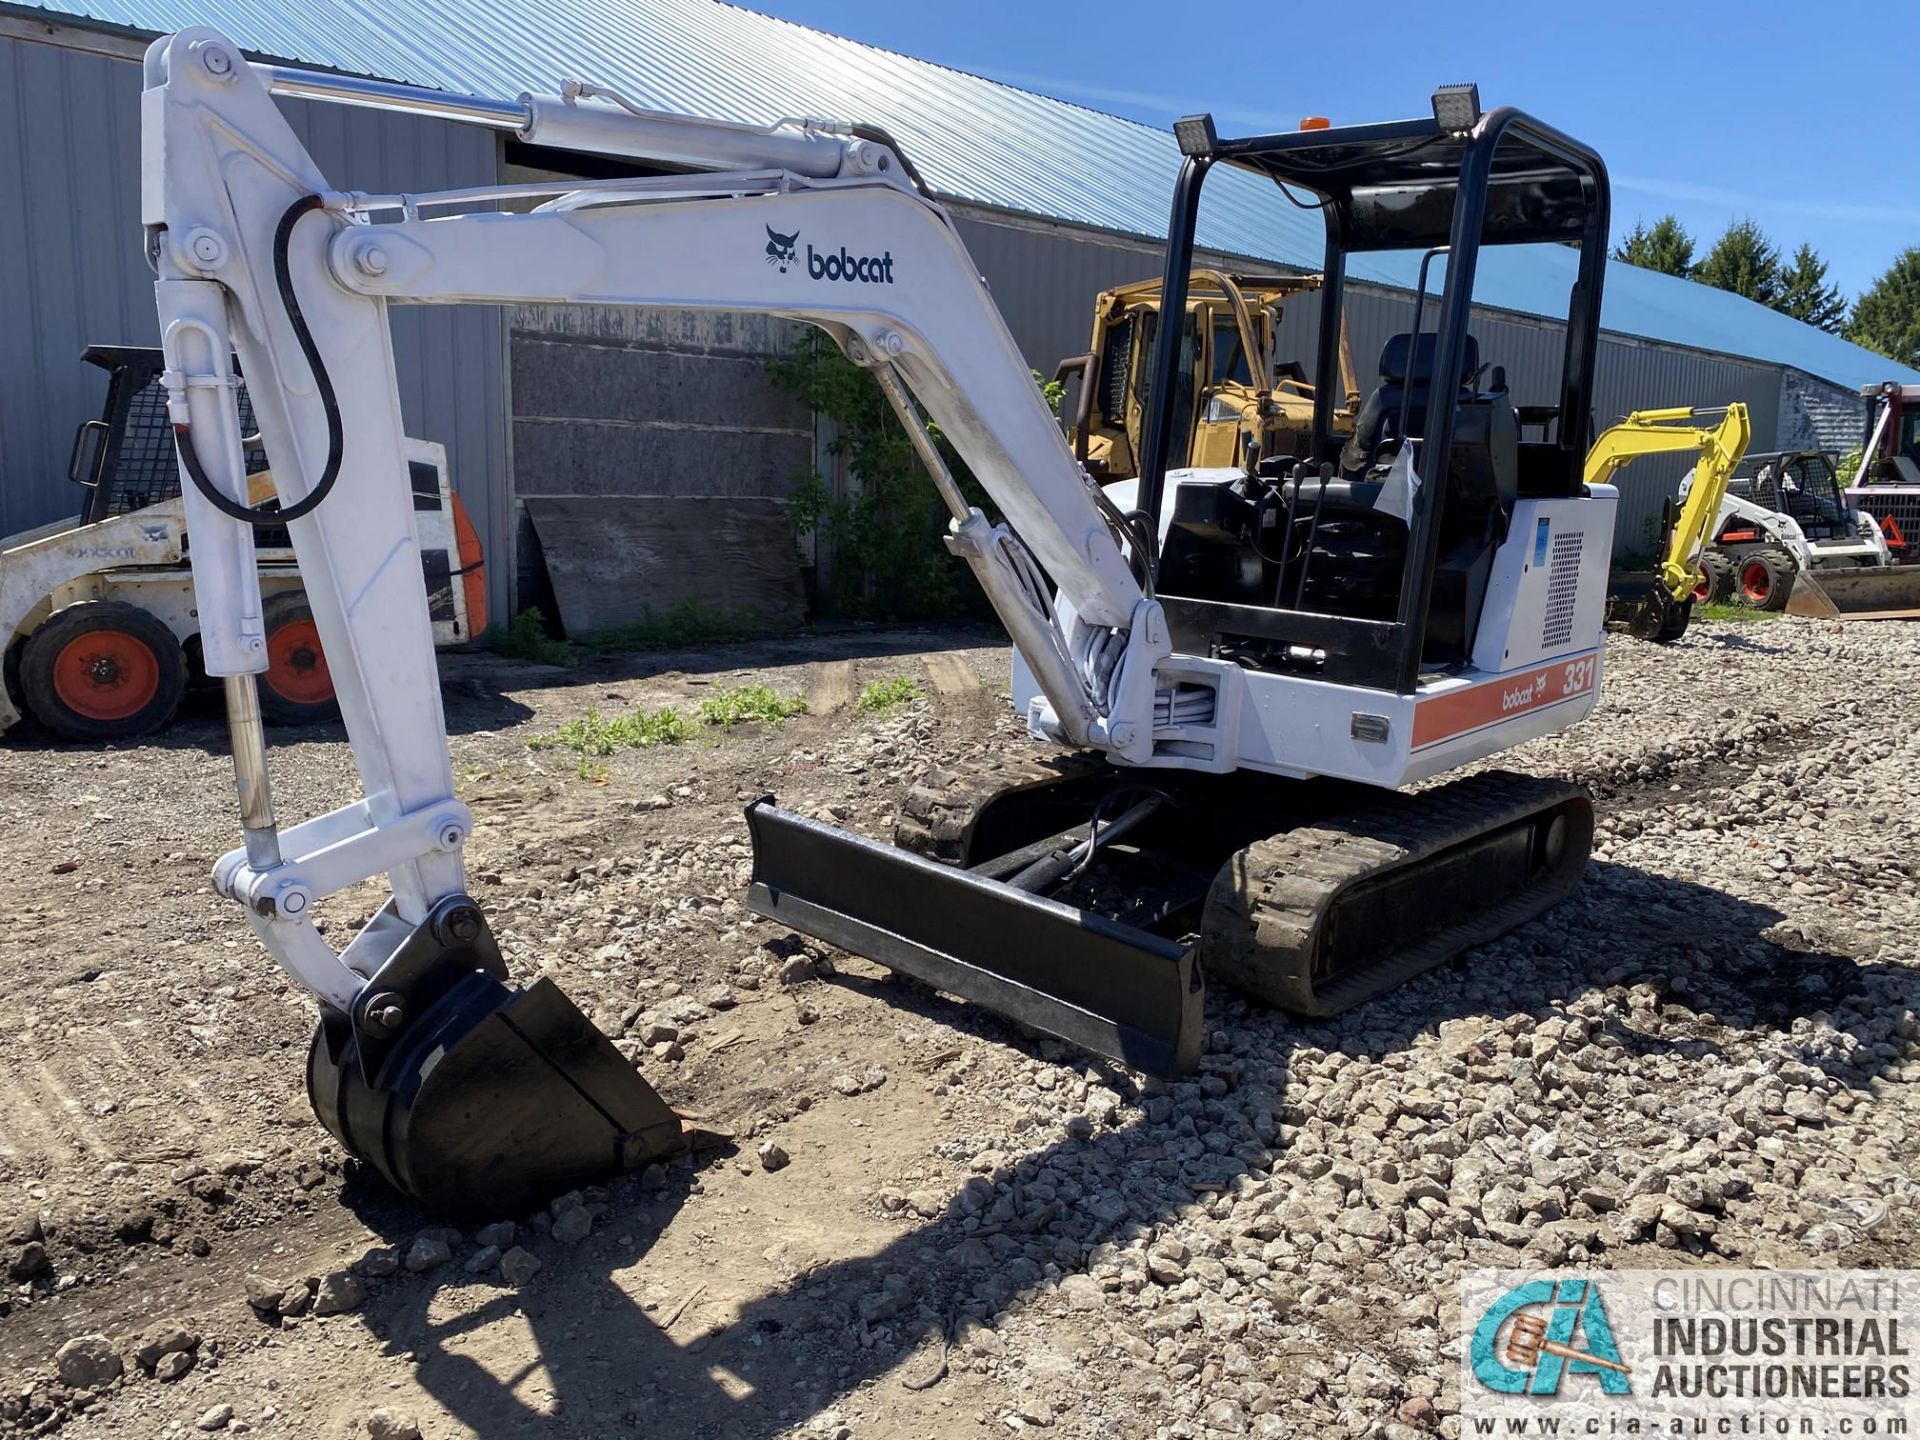 BOBCAT 331 MINI EXCAVATOR, 4-CYLINDER DIESEL ENGINE, 6,275 HOURS; S/N 511920385, WITH 20" TOOTH - Image 4 of 7